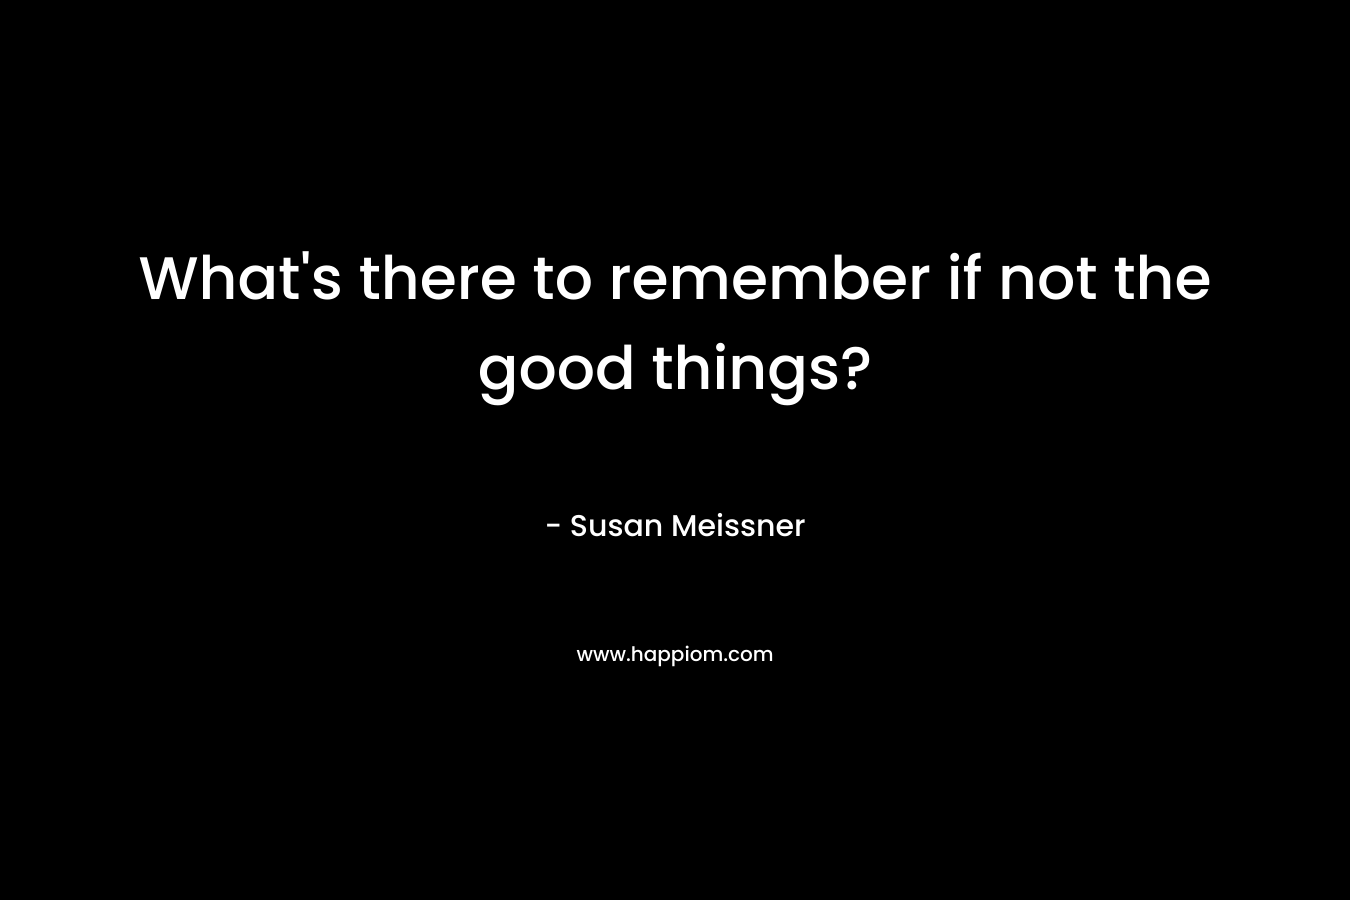 What's there to remember if not the good things?